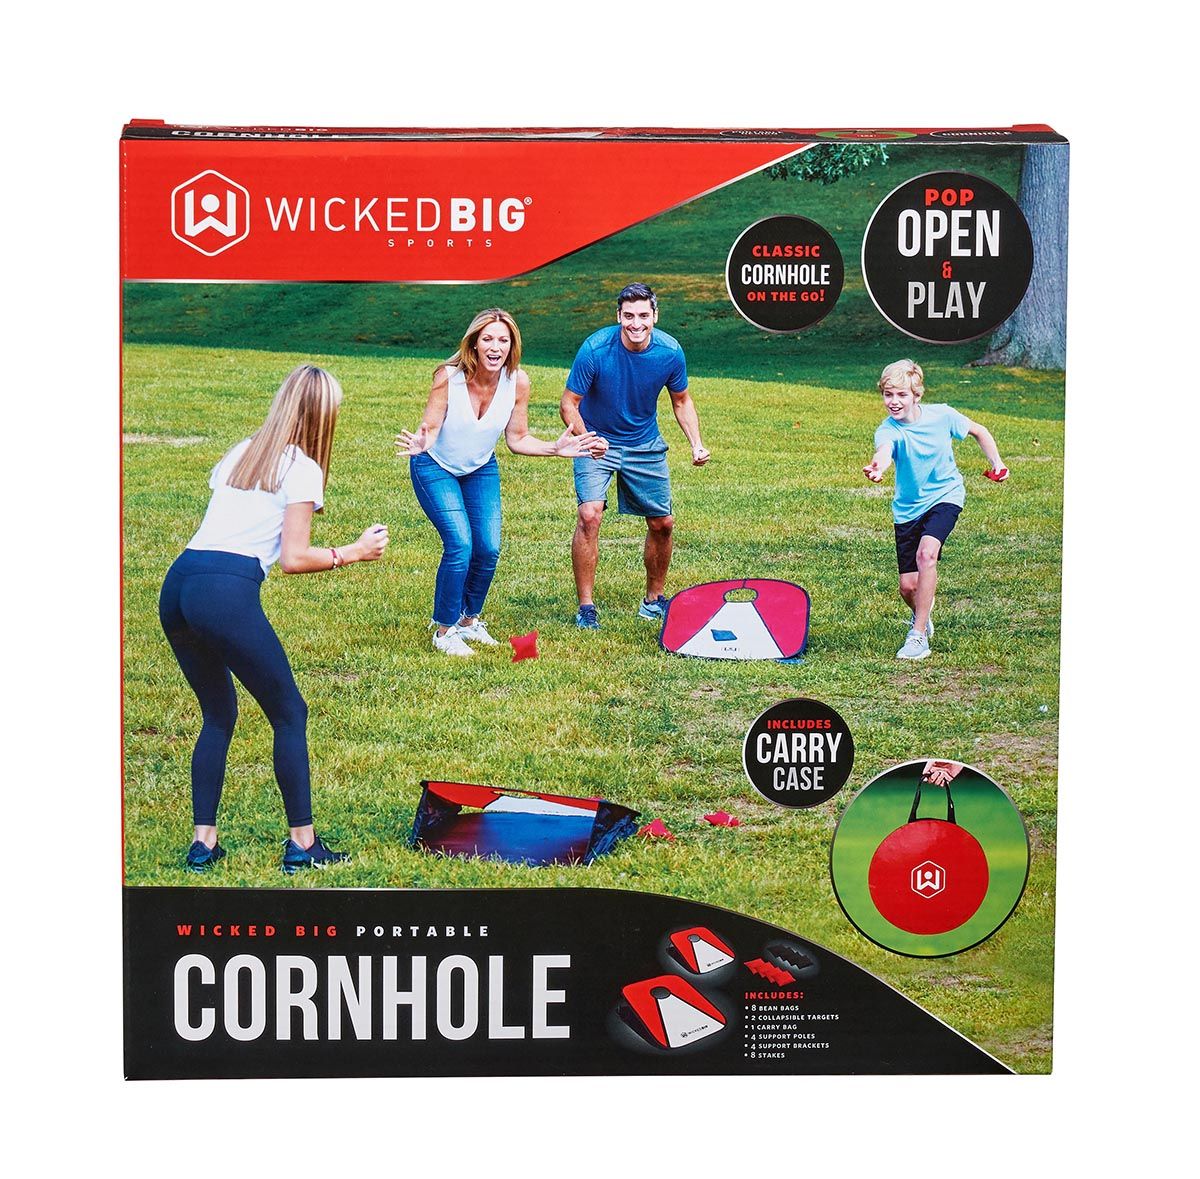 Wicked Big Sports 3ft x 2ft Collapsible Vinyl Cornhole Outdoor Lawn Game - image 1 of 8